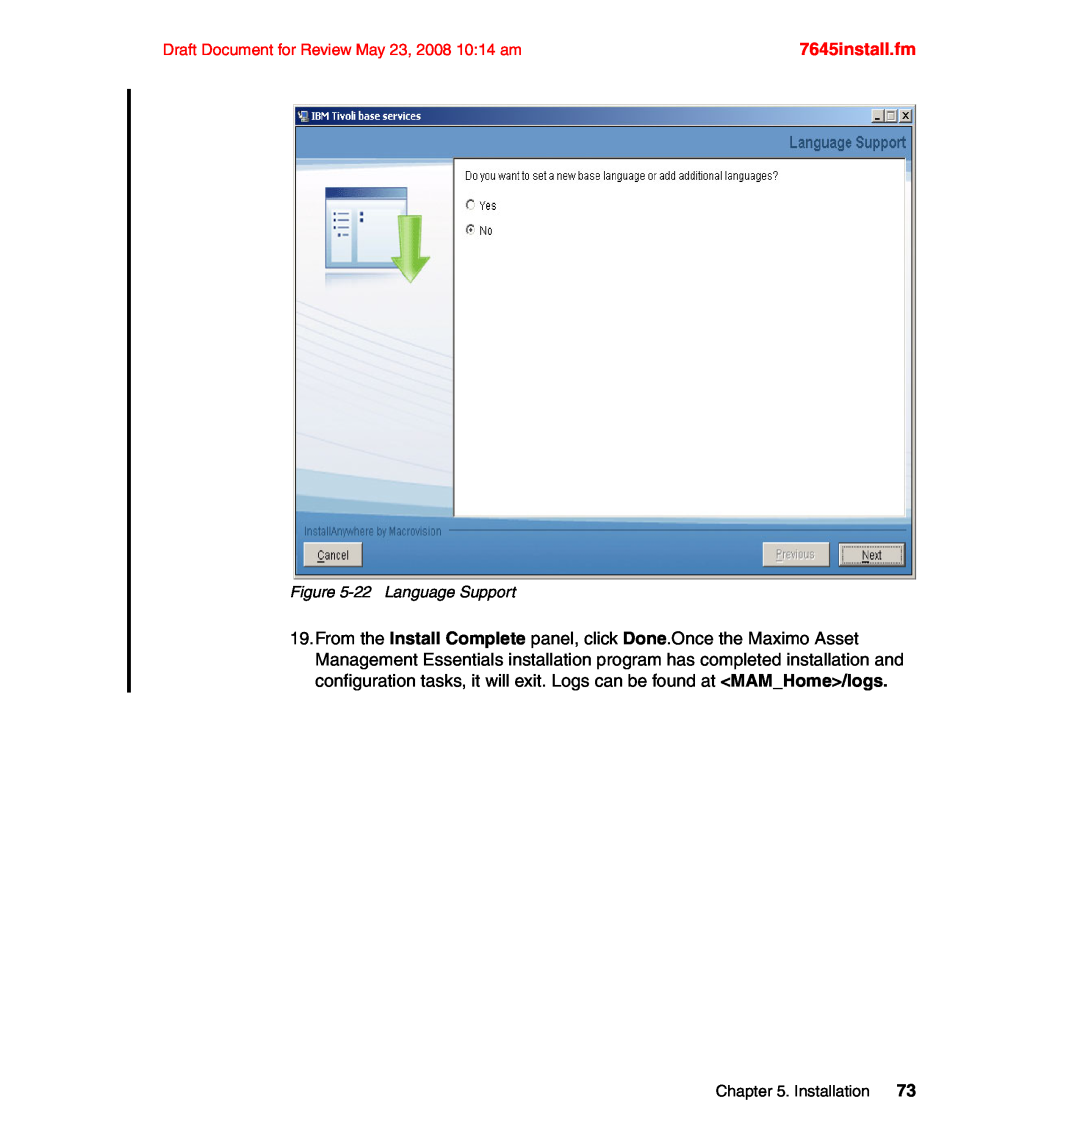 IBM SG24-7645-00 manual 7645install.fm, Draft Document for Review May 23, 2008 10:14 am, 22Language Support 